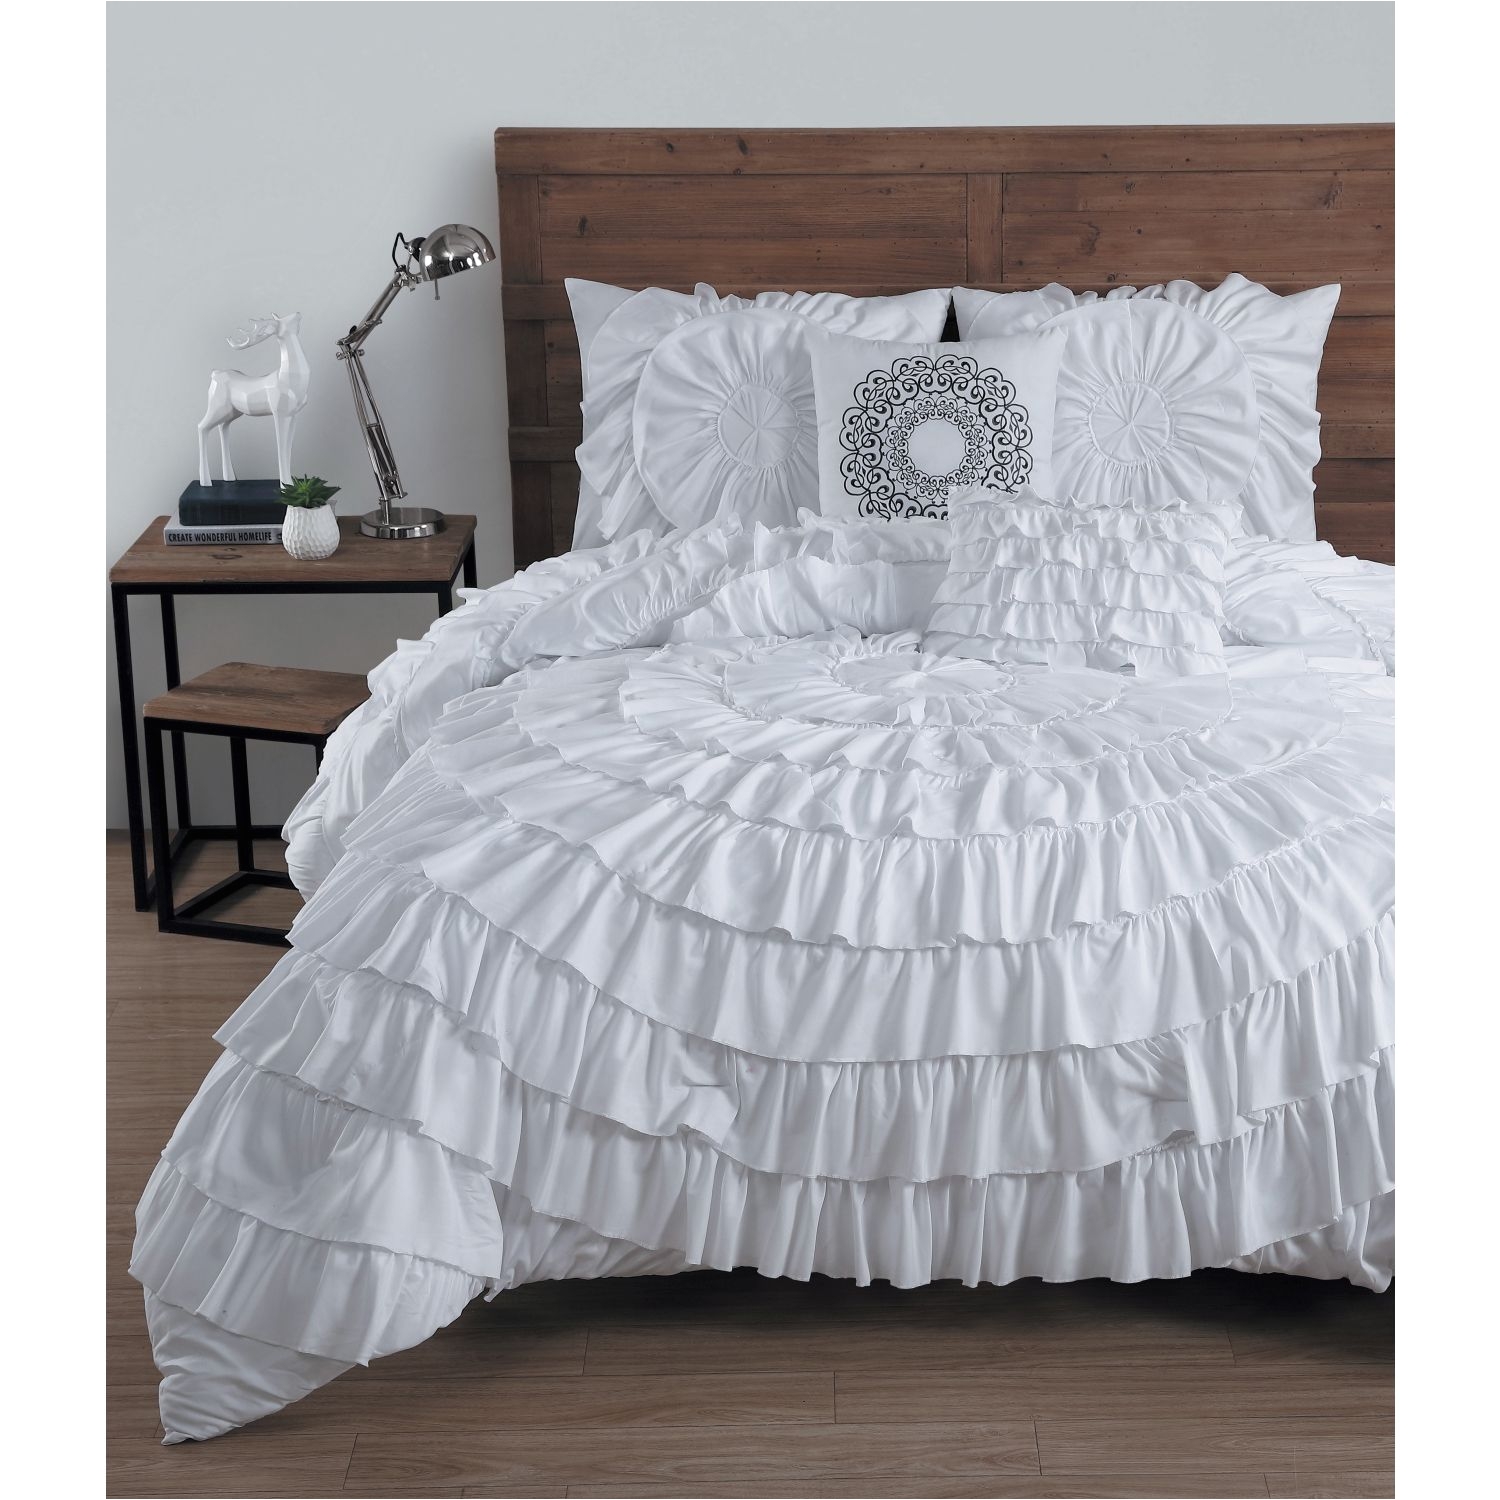 get an expensive designer look for less this elegant comforter set easily adds style and class to your bedroom featuring beautiful circular ruffles